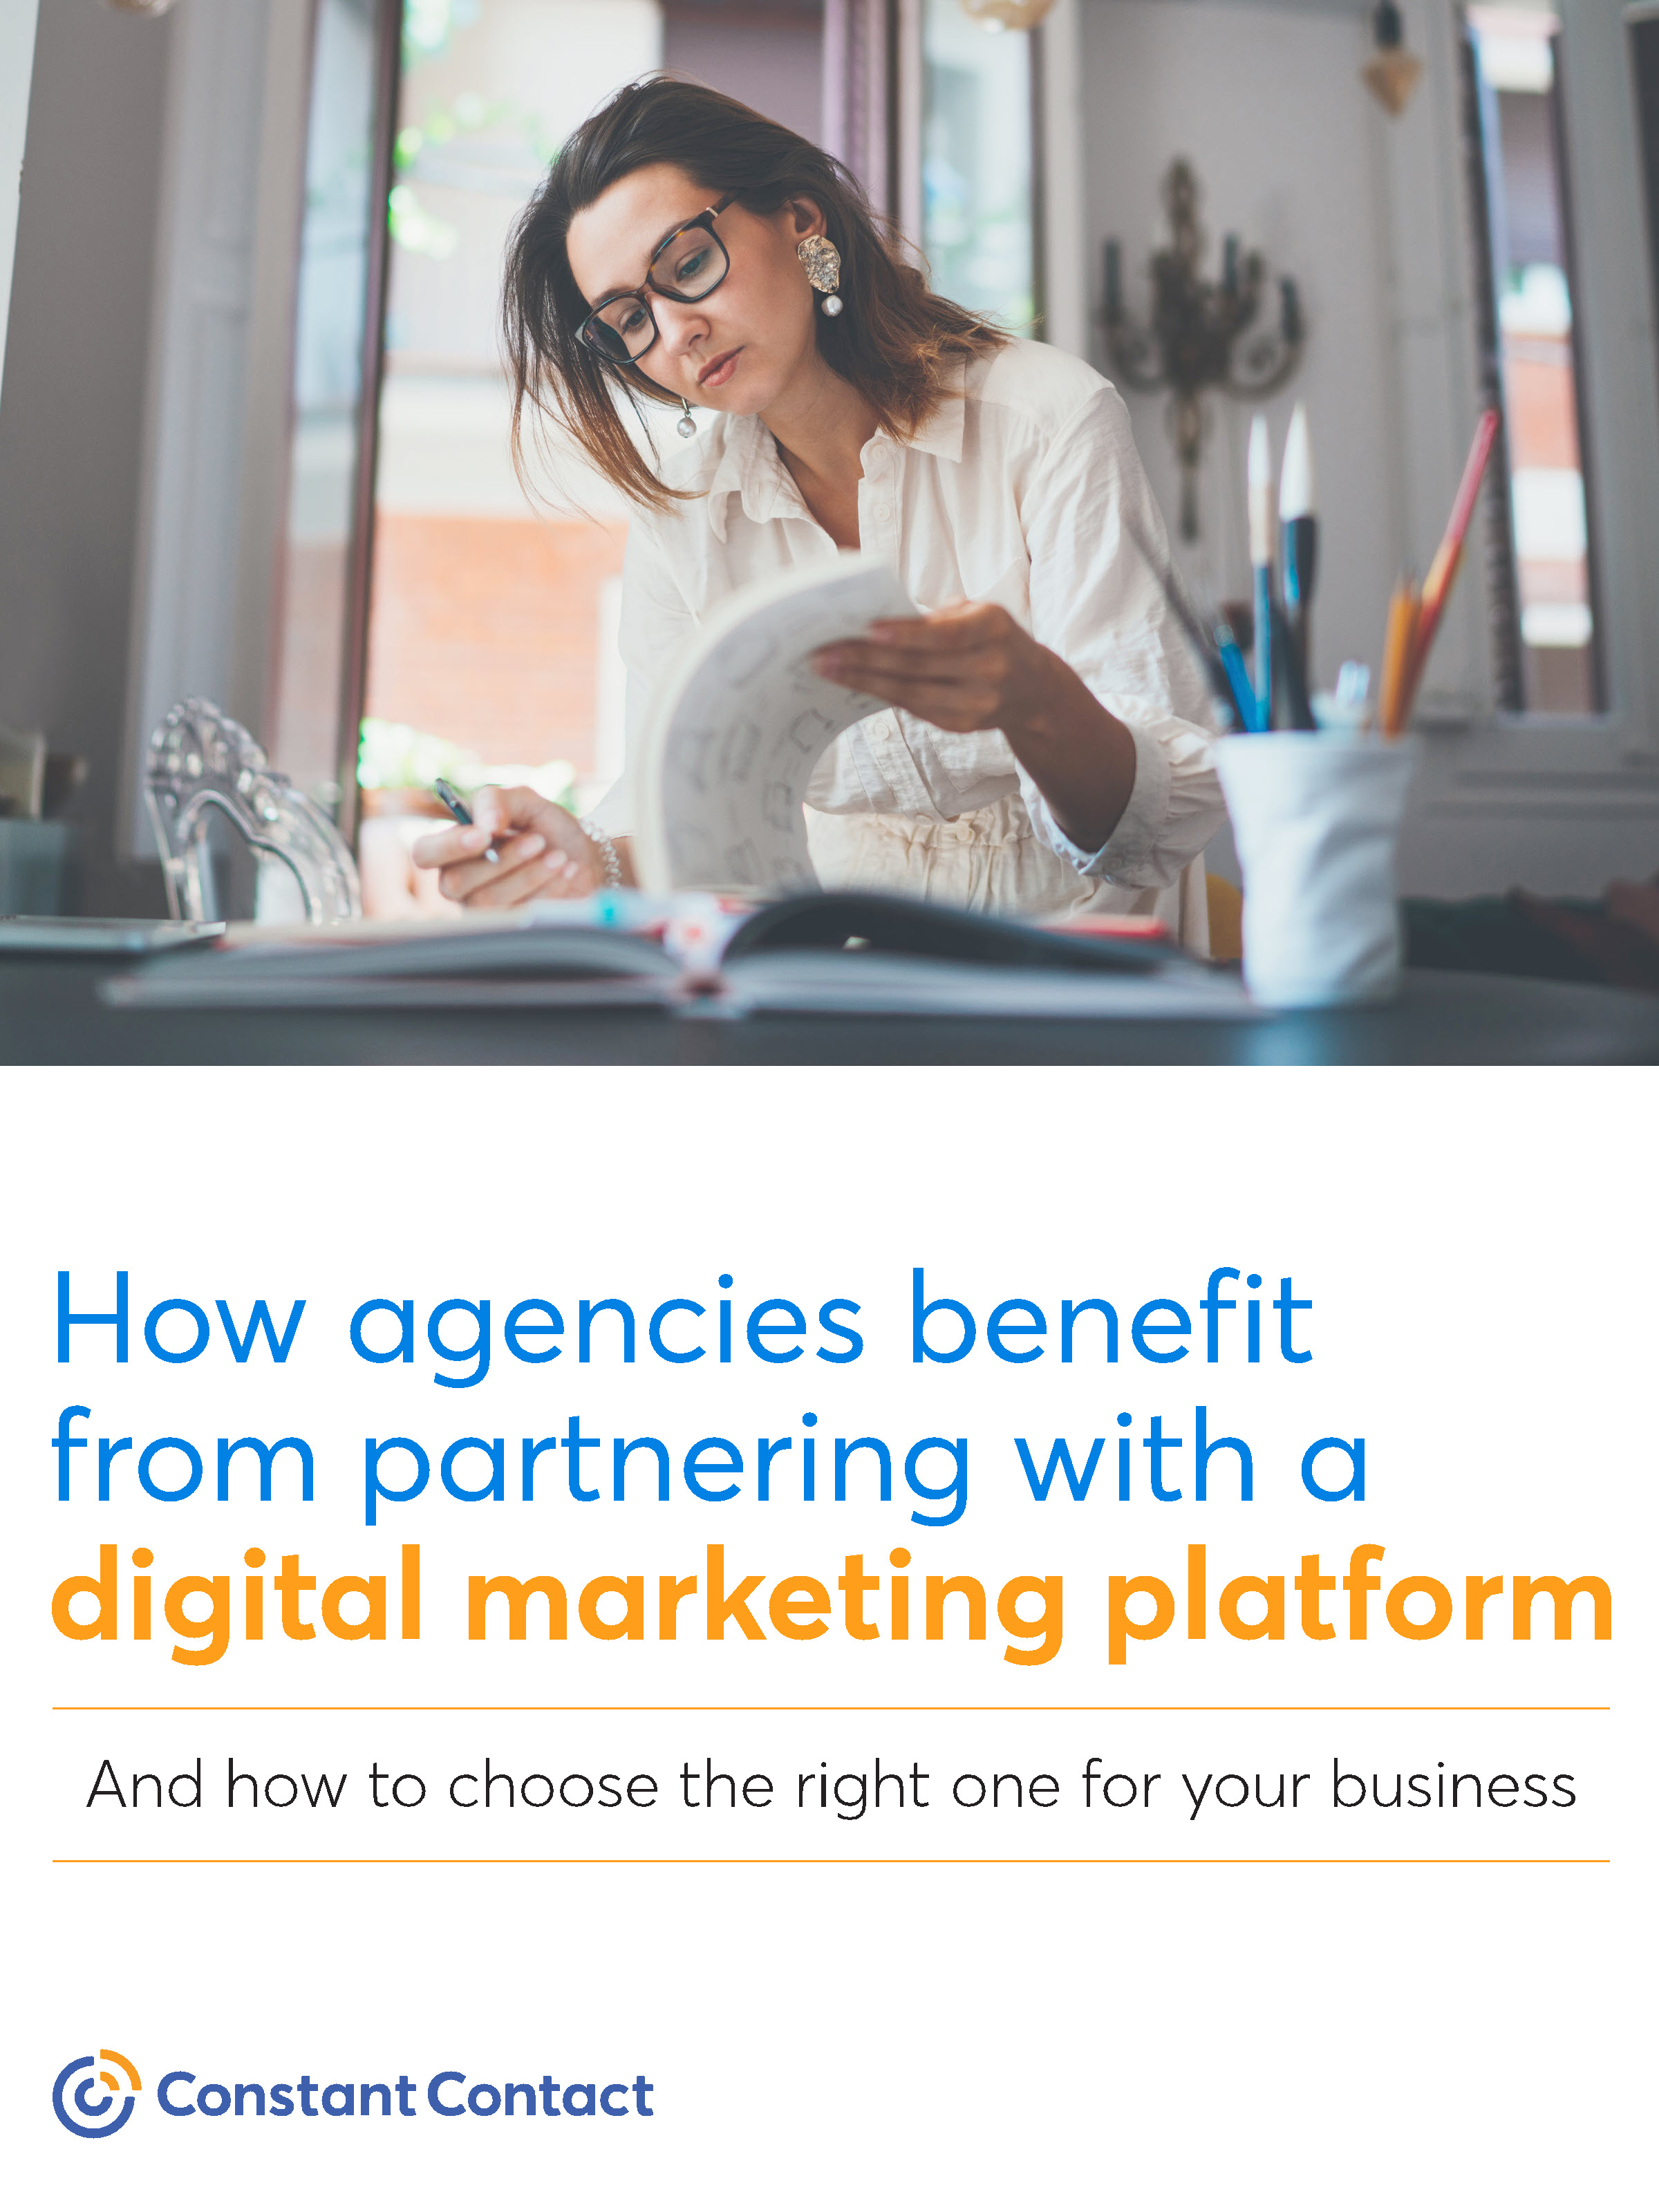 How agencies benefit from partnering with a digital marketing platform guide from Constant Contact